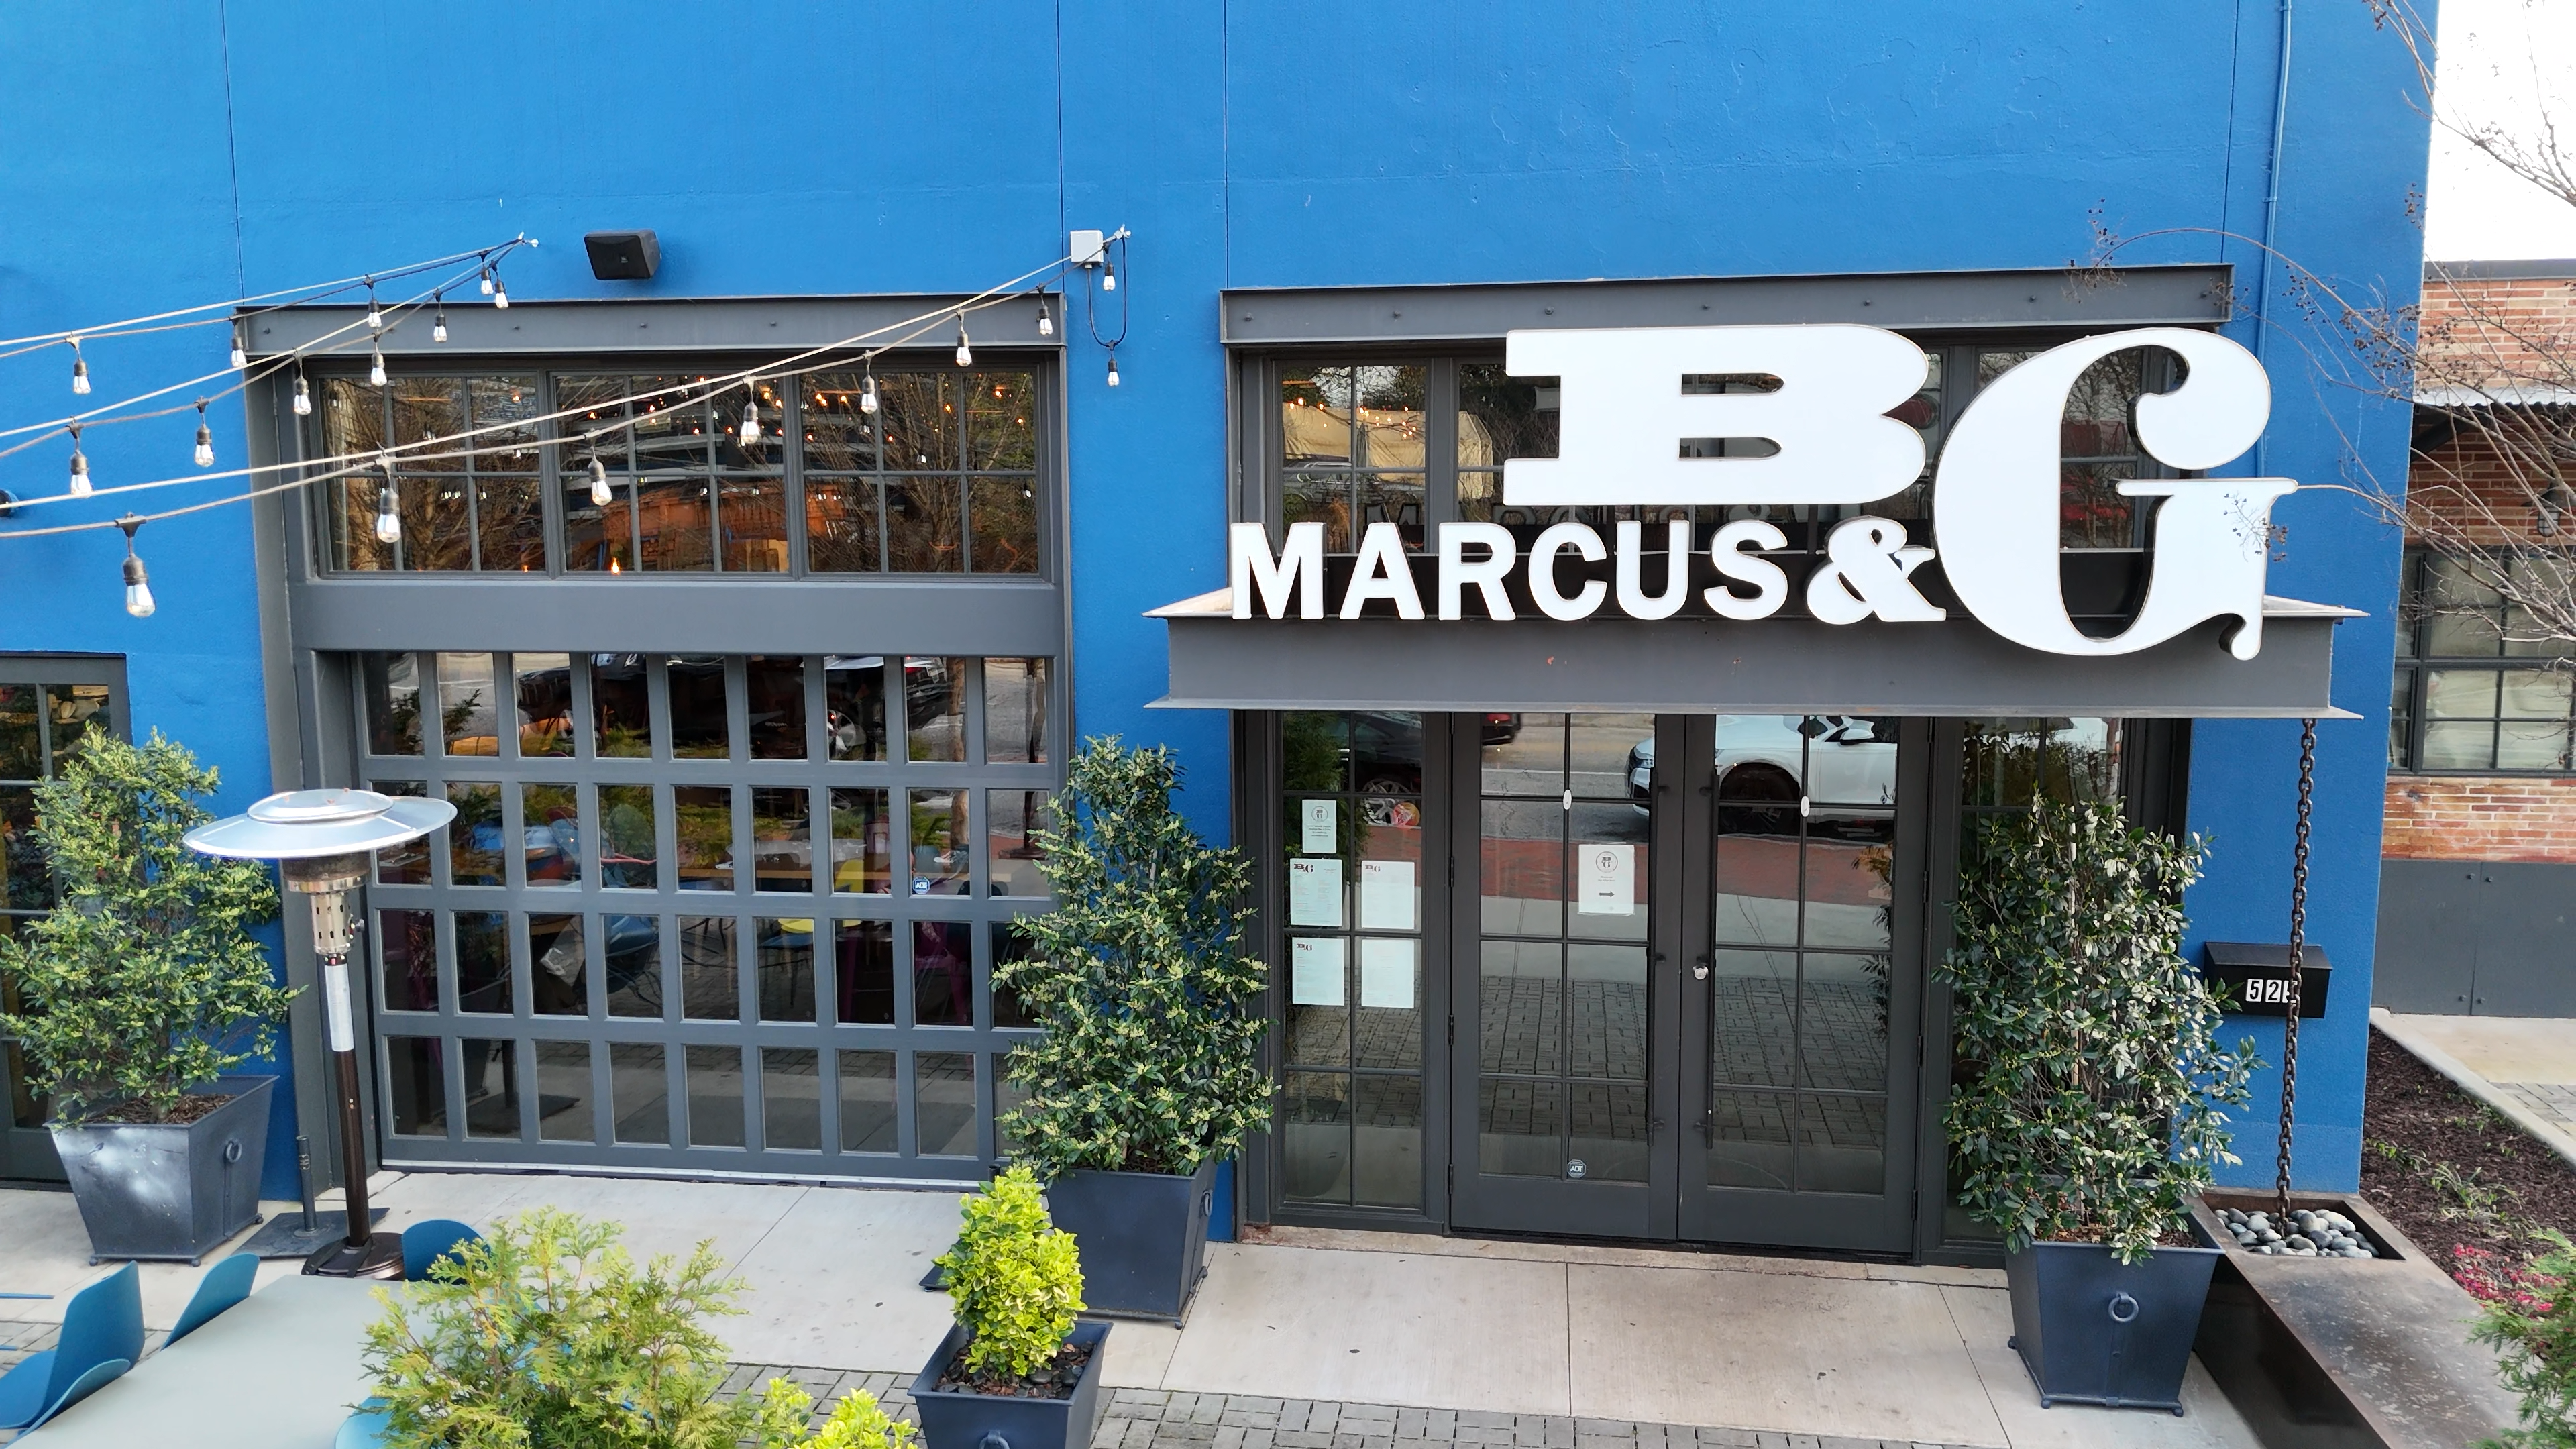 The welcoming front entrance of Marcus Bar & Grille in Atlanta, with its distinctive signage and modern facade.